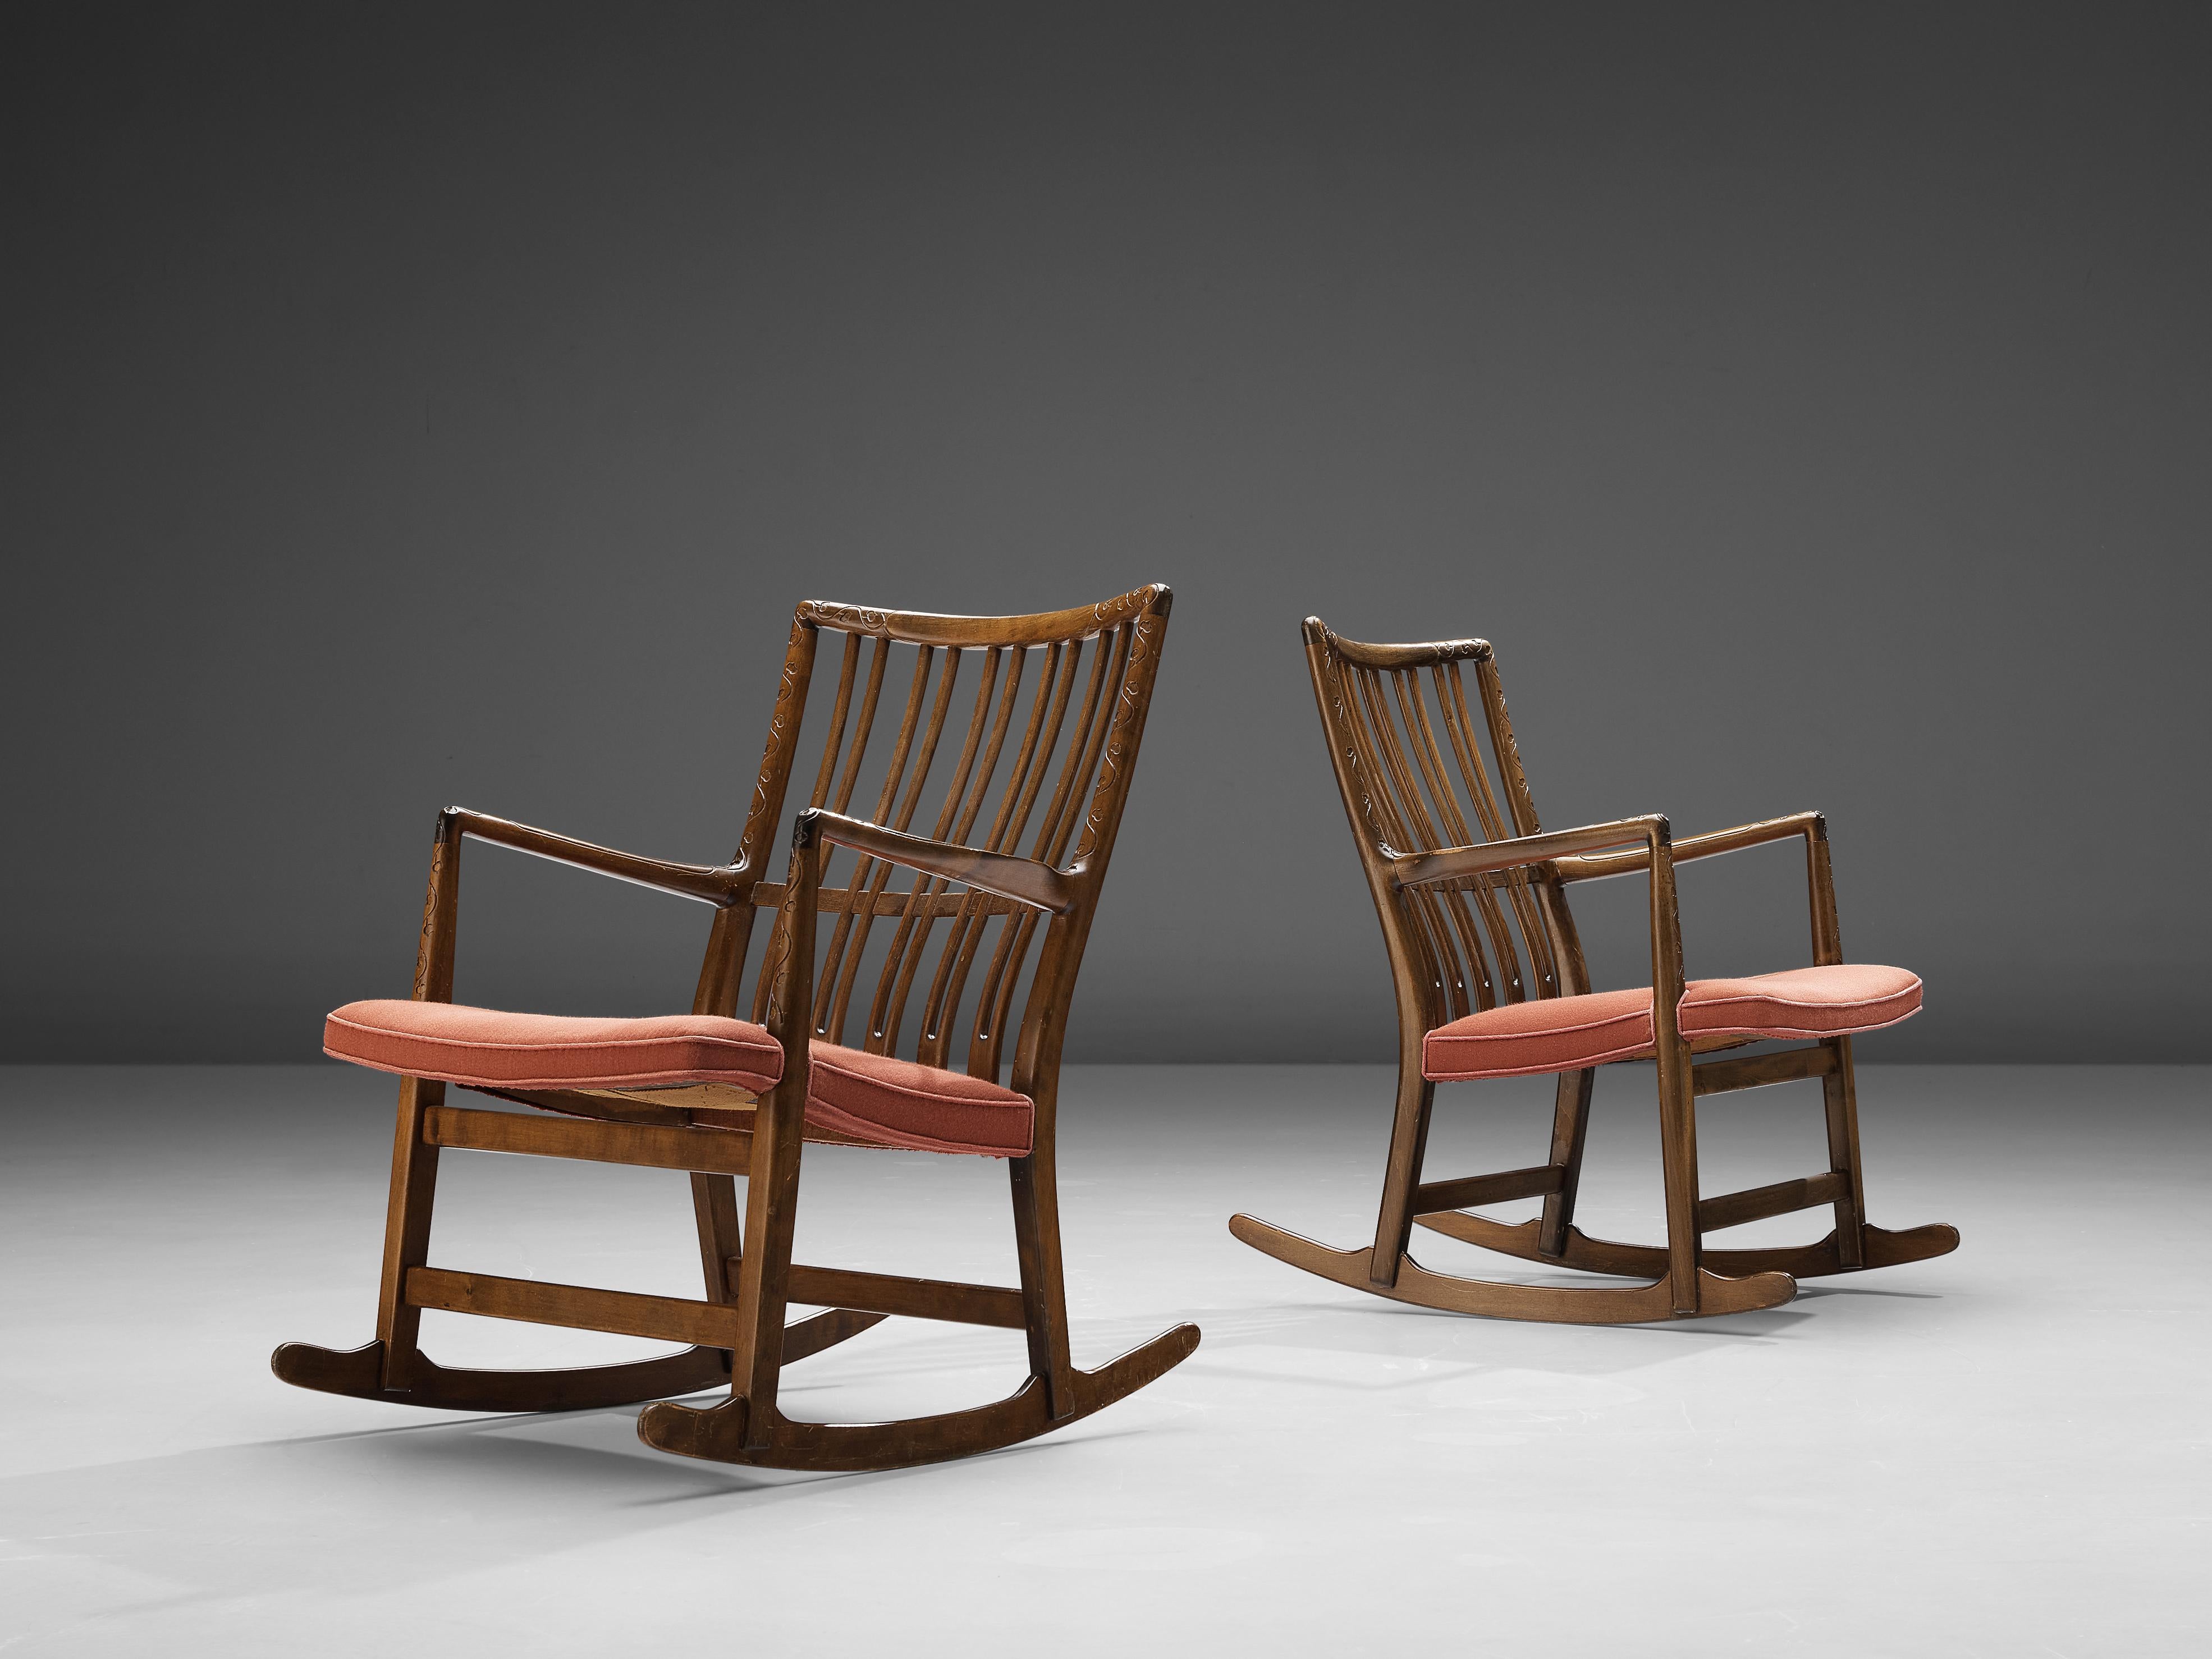 Hans Wegner for Mikael Laursen, pair of ML-33 rocking chairs, beech, fabric upholstery, Denmark, 1940s
 
Hans Wegner designed the ‘ML-33’ rocking chair for Laursen in the 1940s. The wooden frame features an elegant backrest with slim, vertical slats